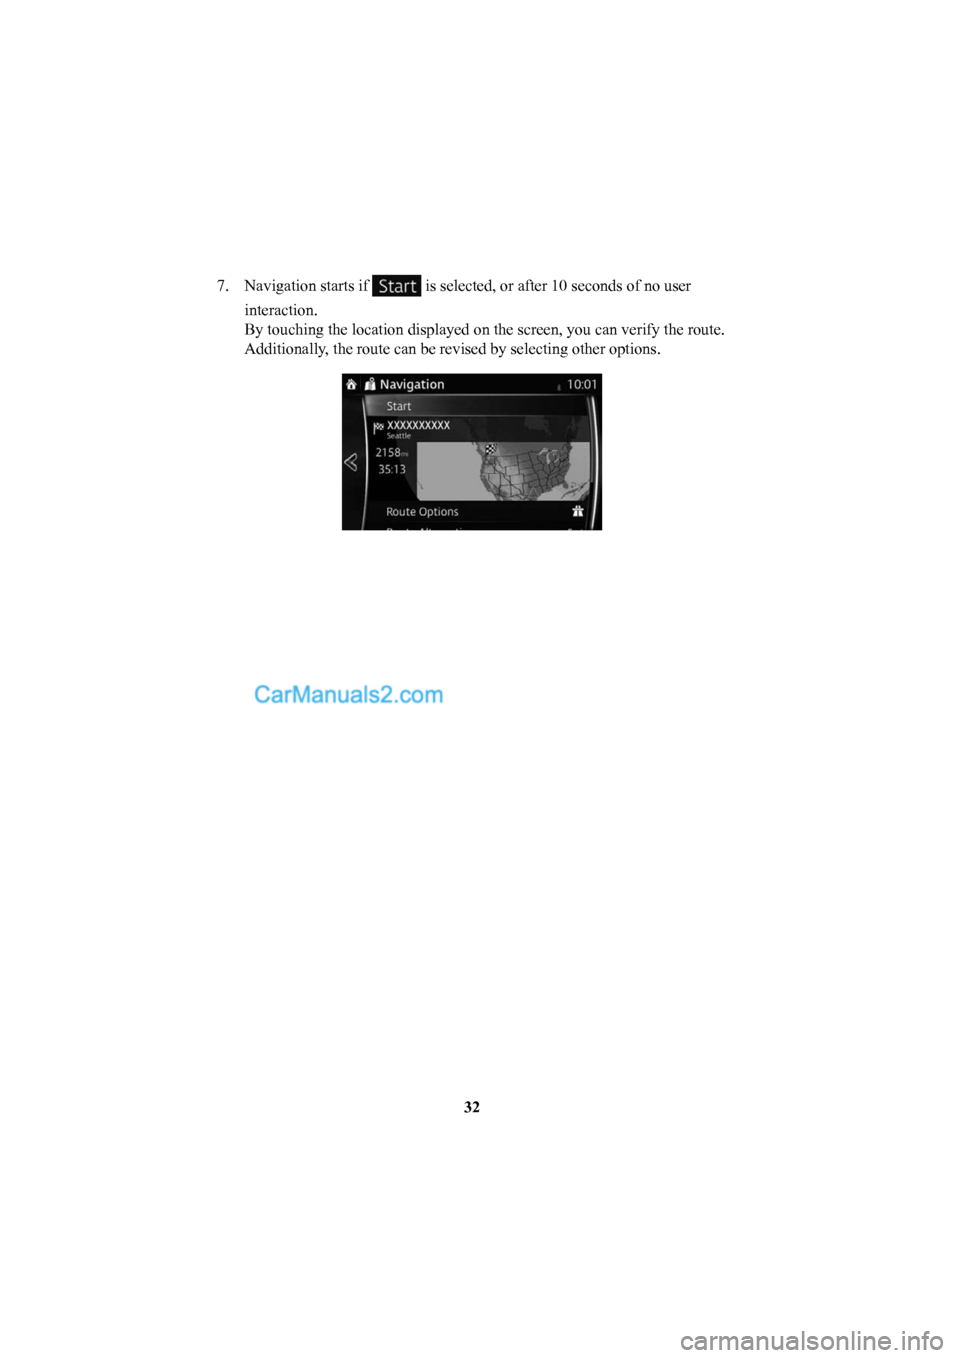 MAZDA MODEL CX-5 2016  Navigation Manual (in English) 32
7.  Navigation starts if 
 is selected, or after 10 seconds of no user 
interaction.
By touching the location displayed on the screen, you can verify the rou\
te. 
Additionally, the route can be re